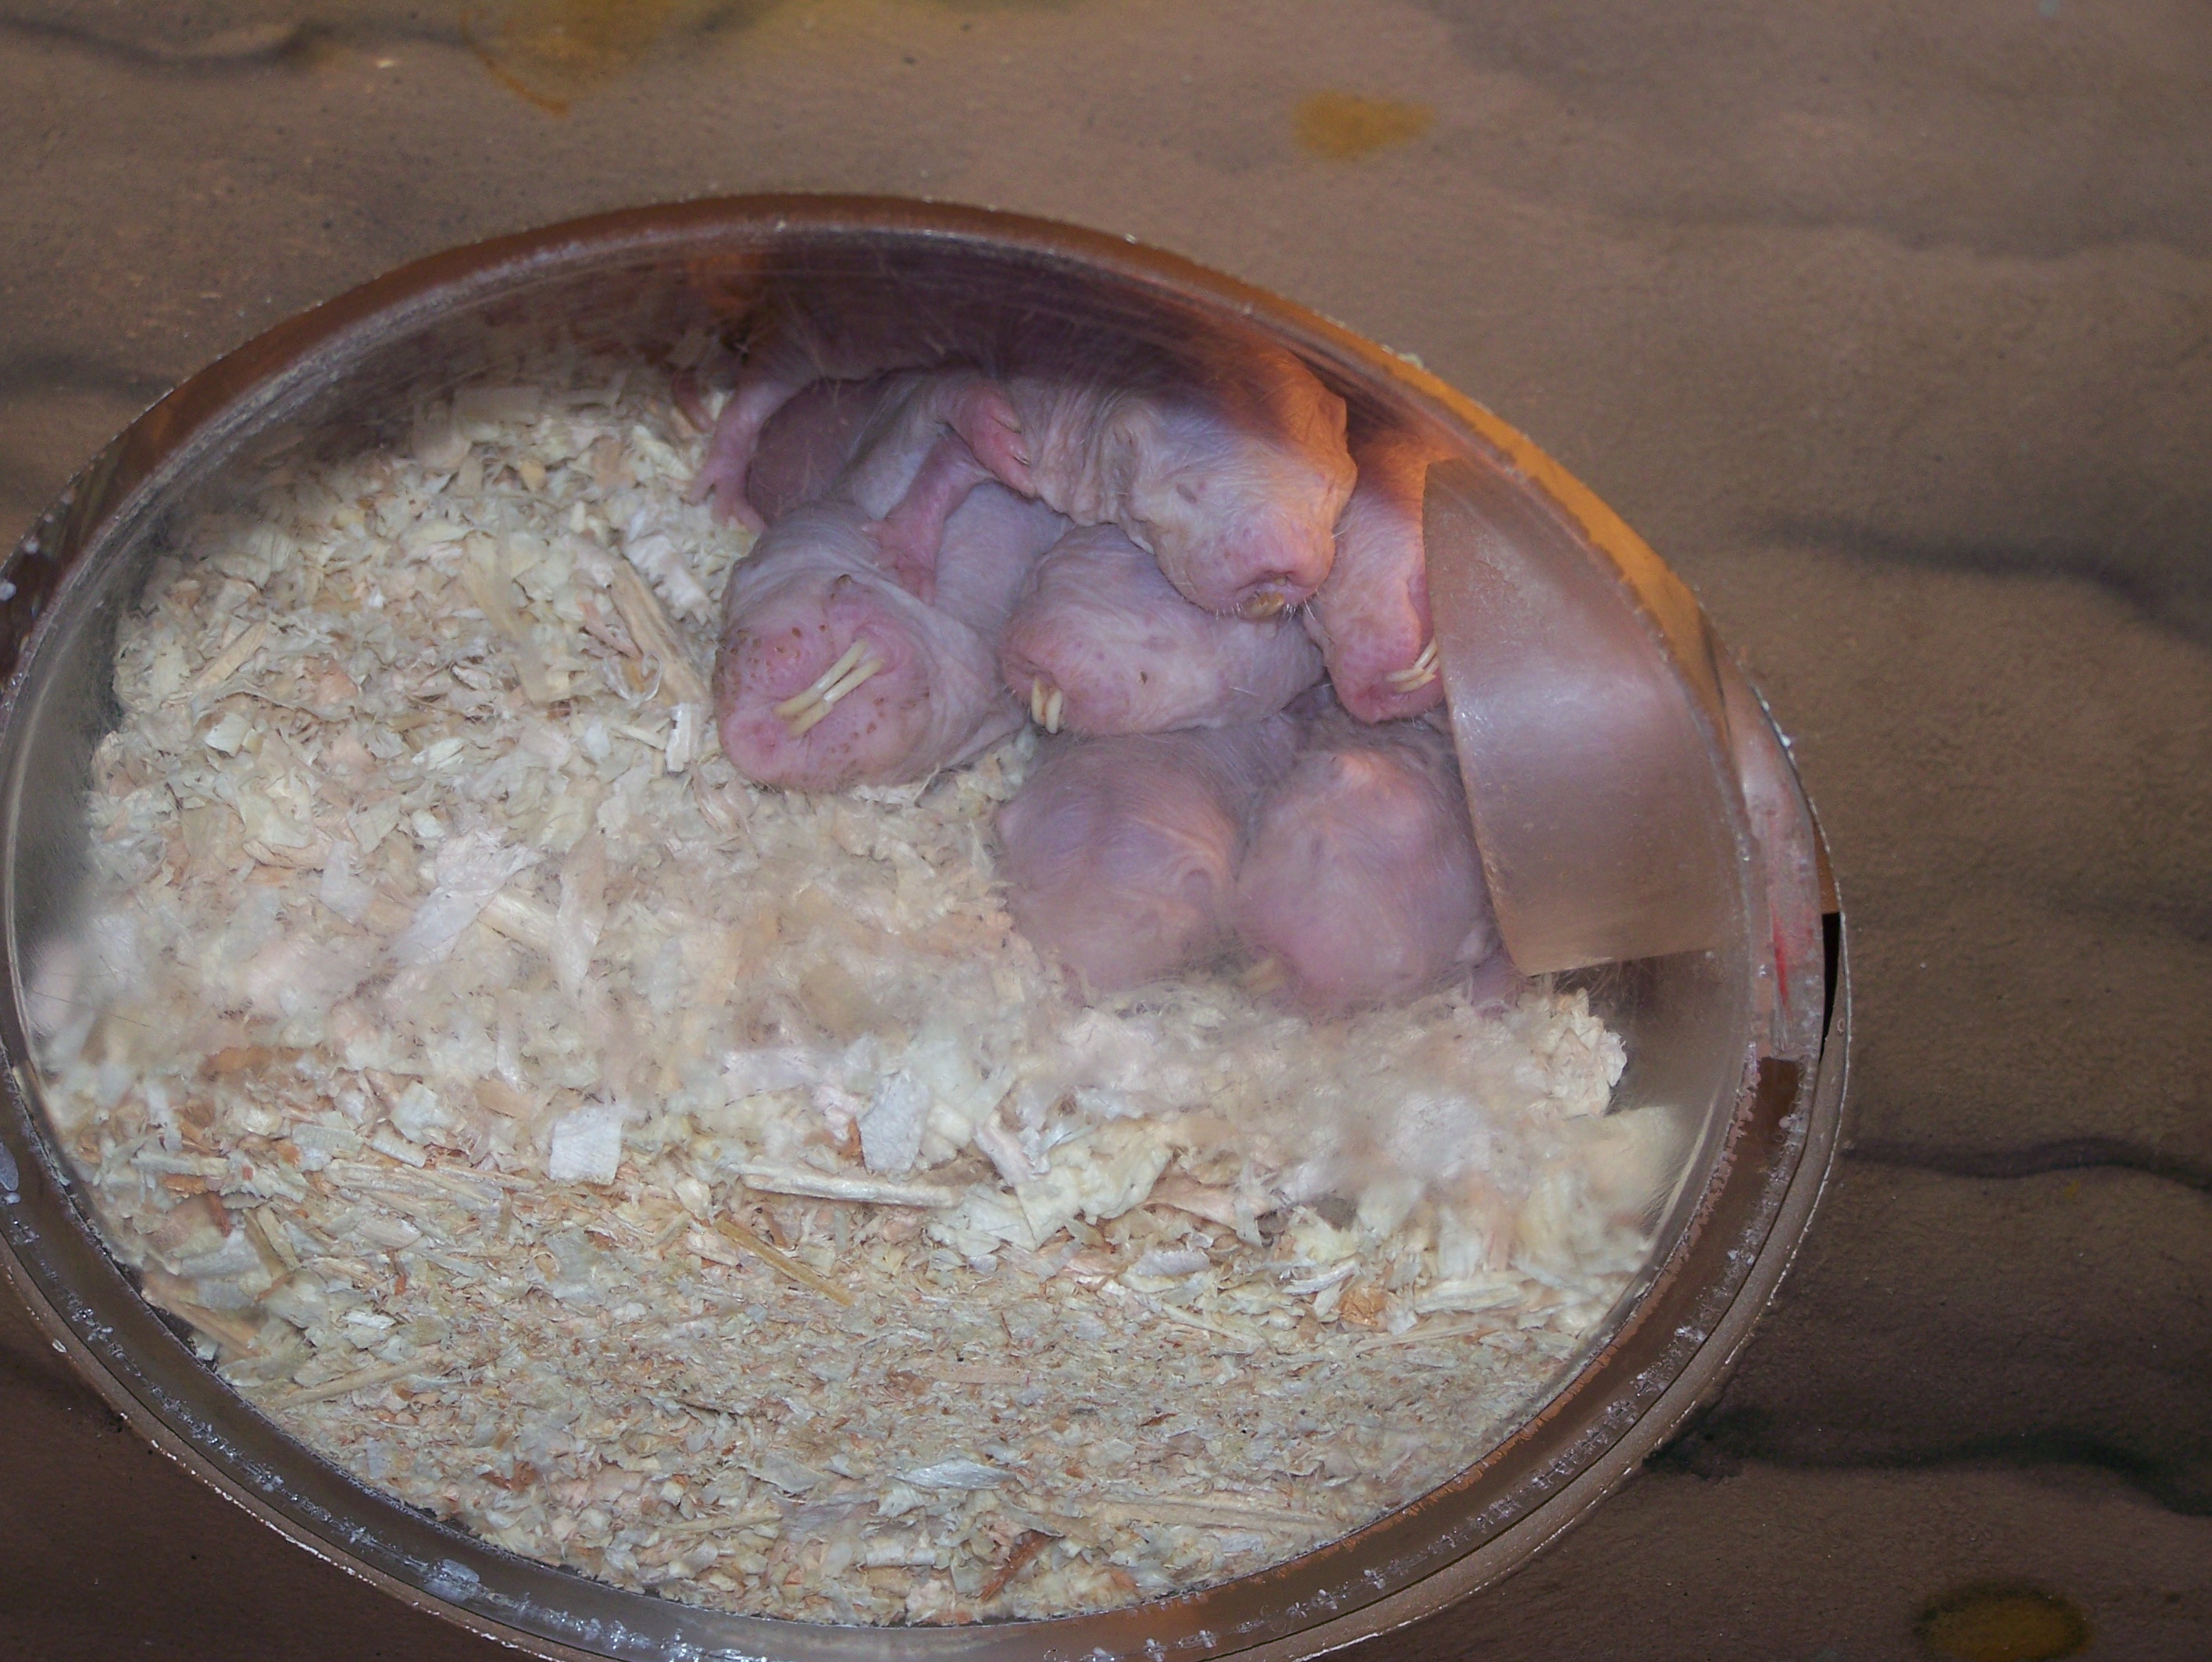 Naked Mole Rats at the St. Louis Zoo